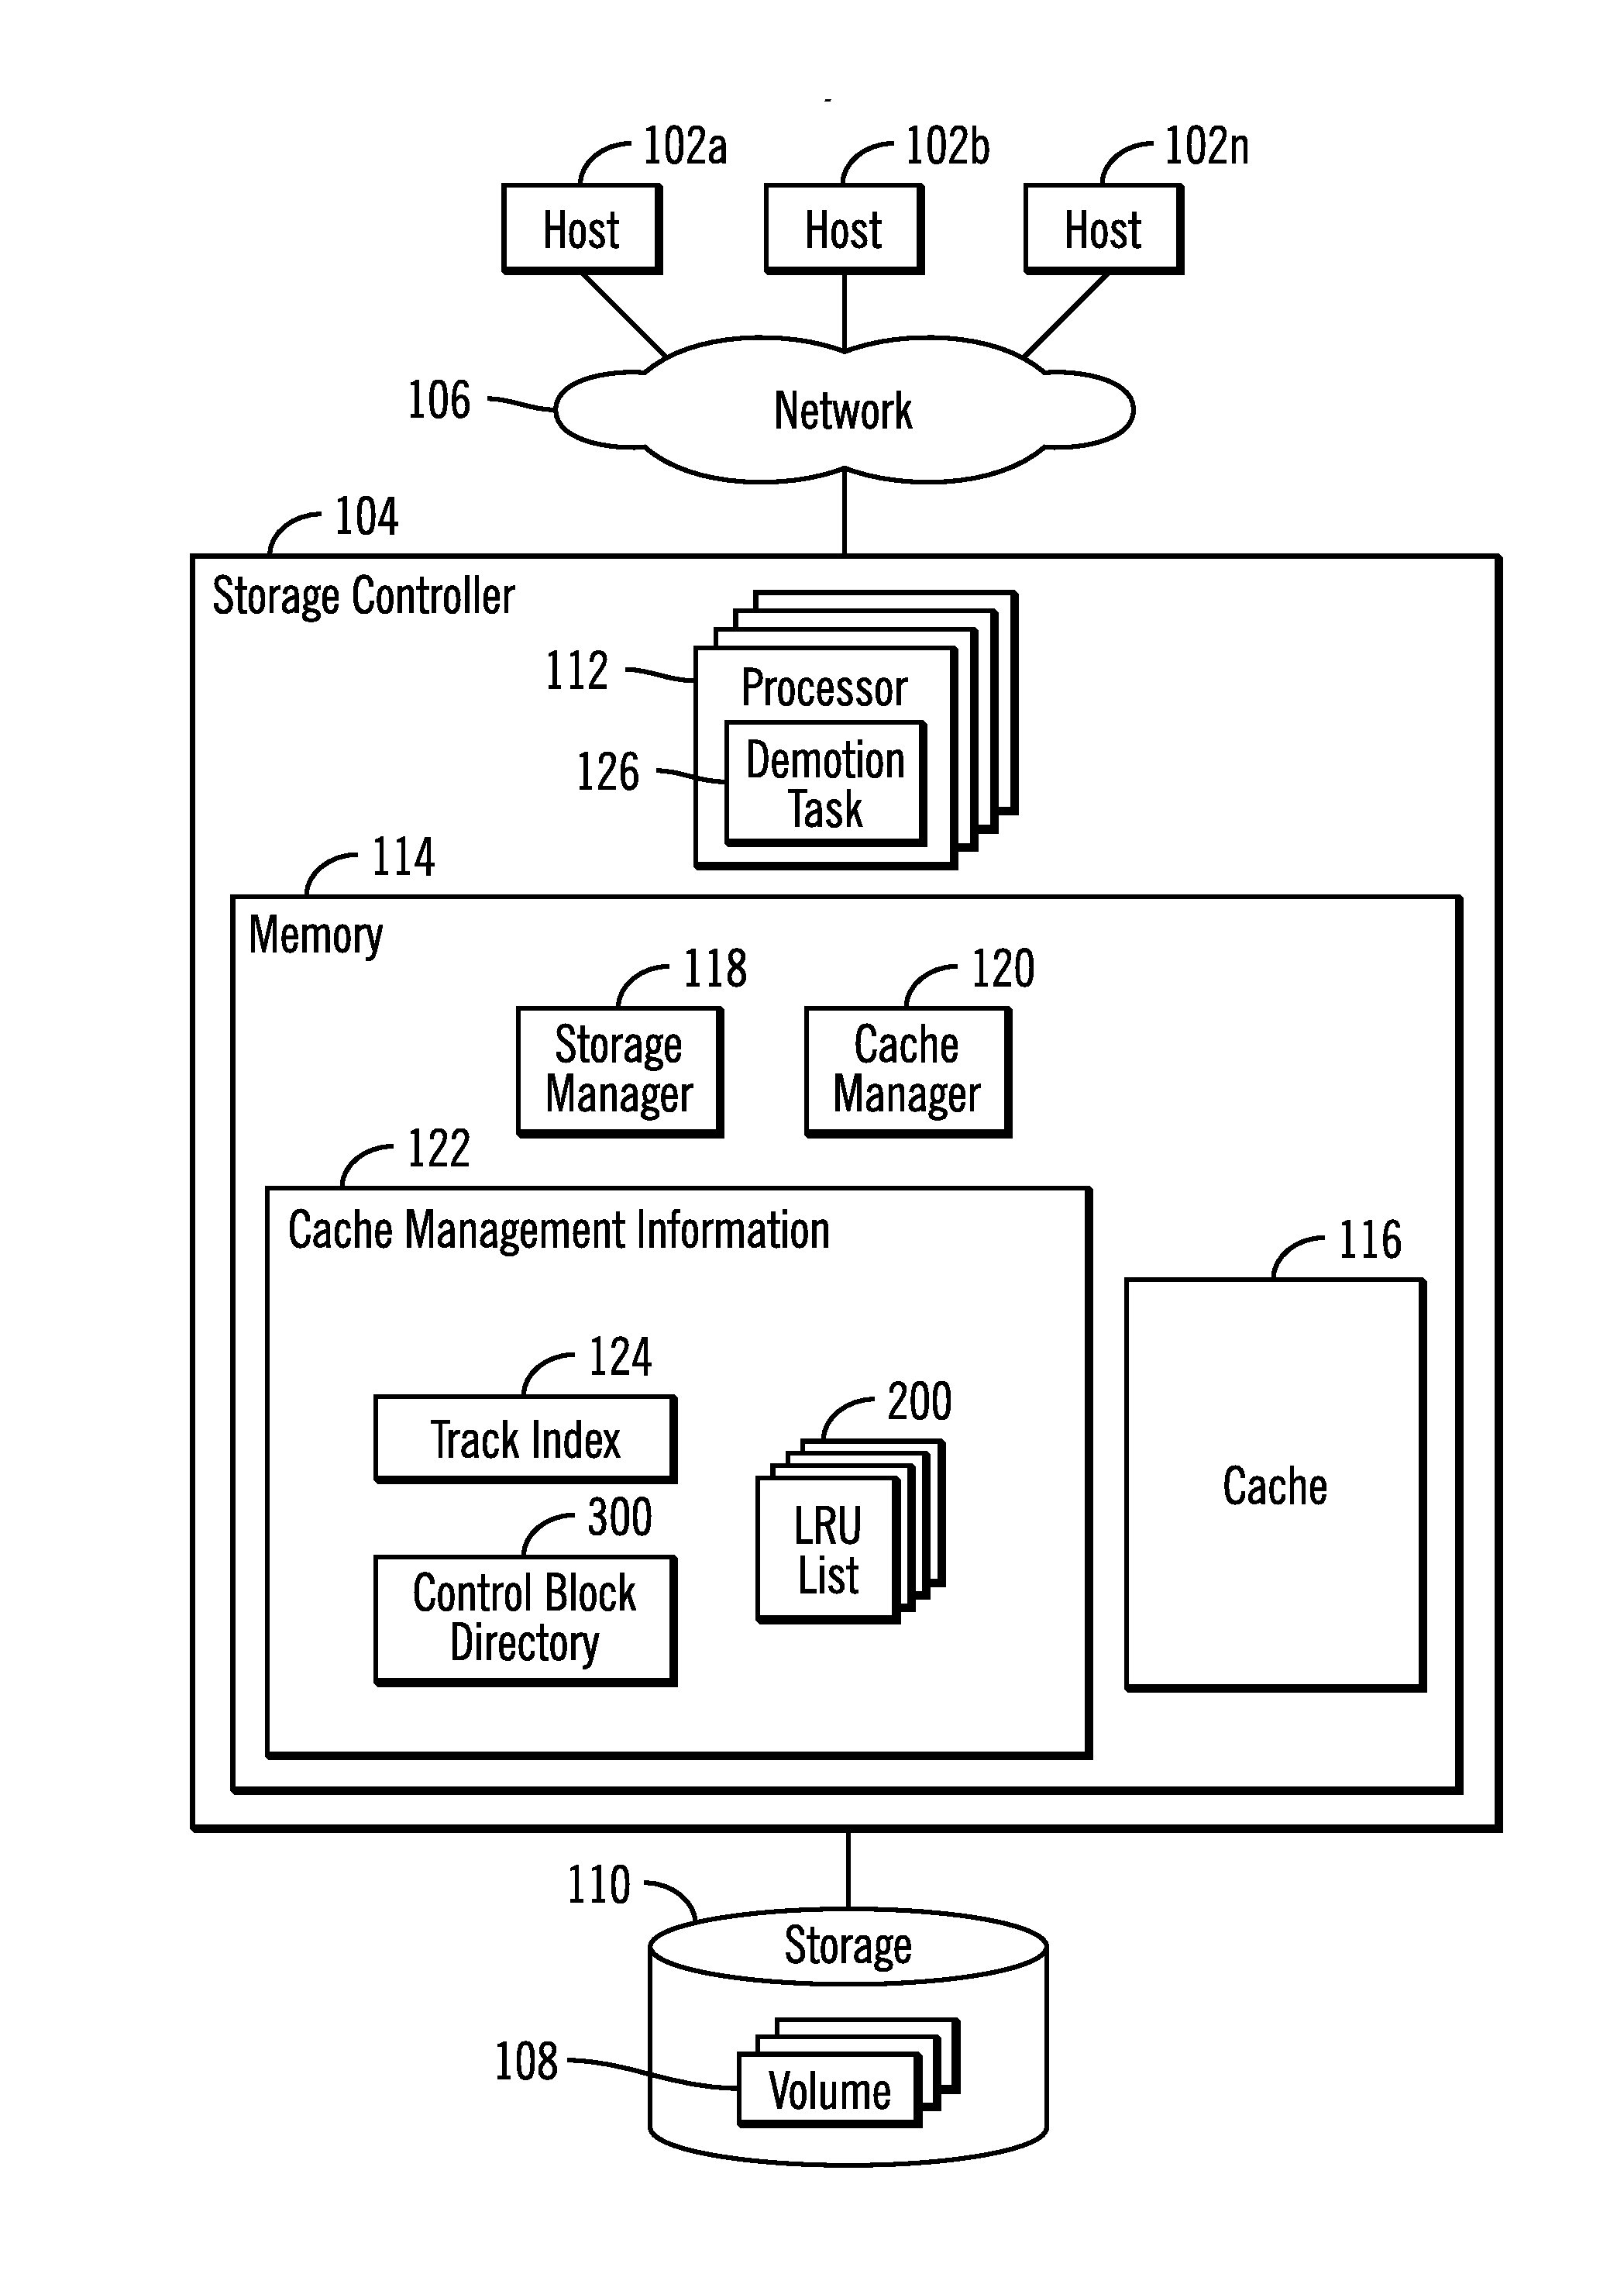 Using cache lists for processors to determine tracks to demote from a cache